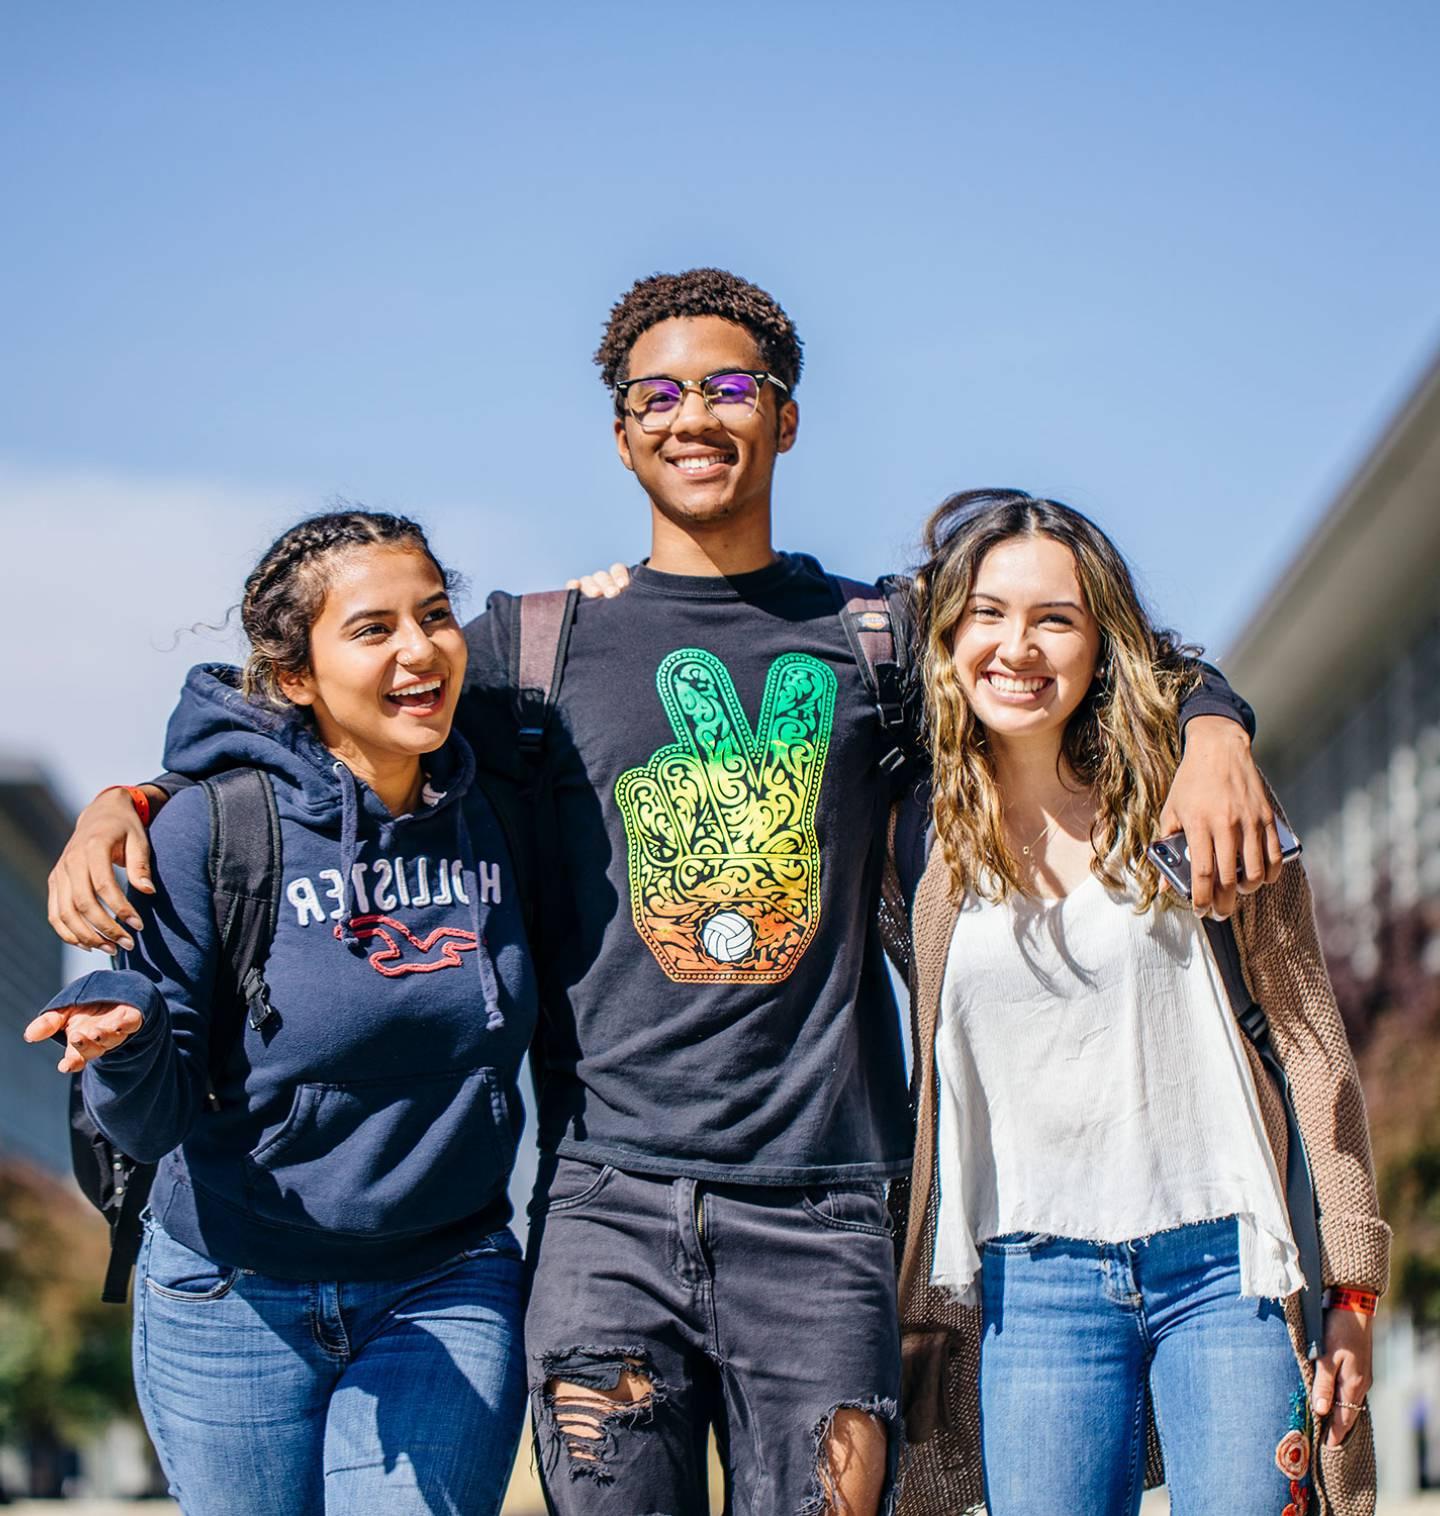 Three students with their arms around each other walking on campus